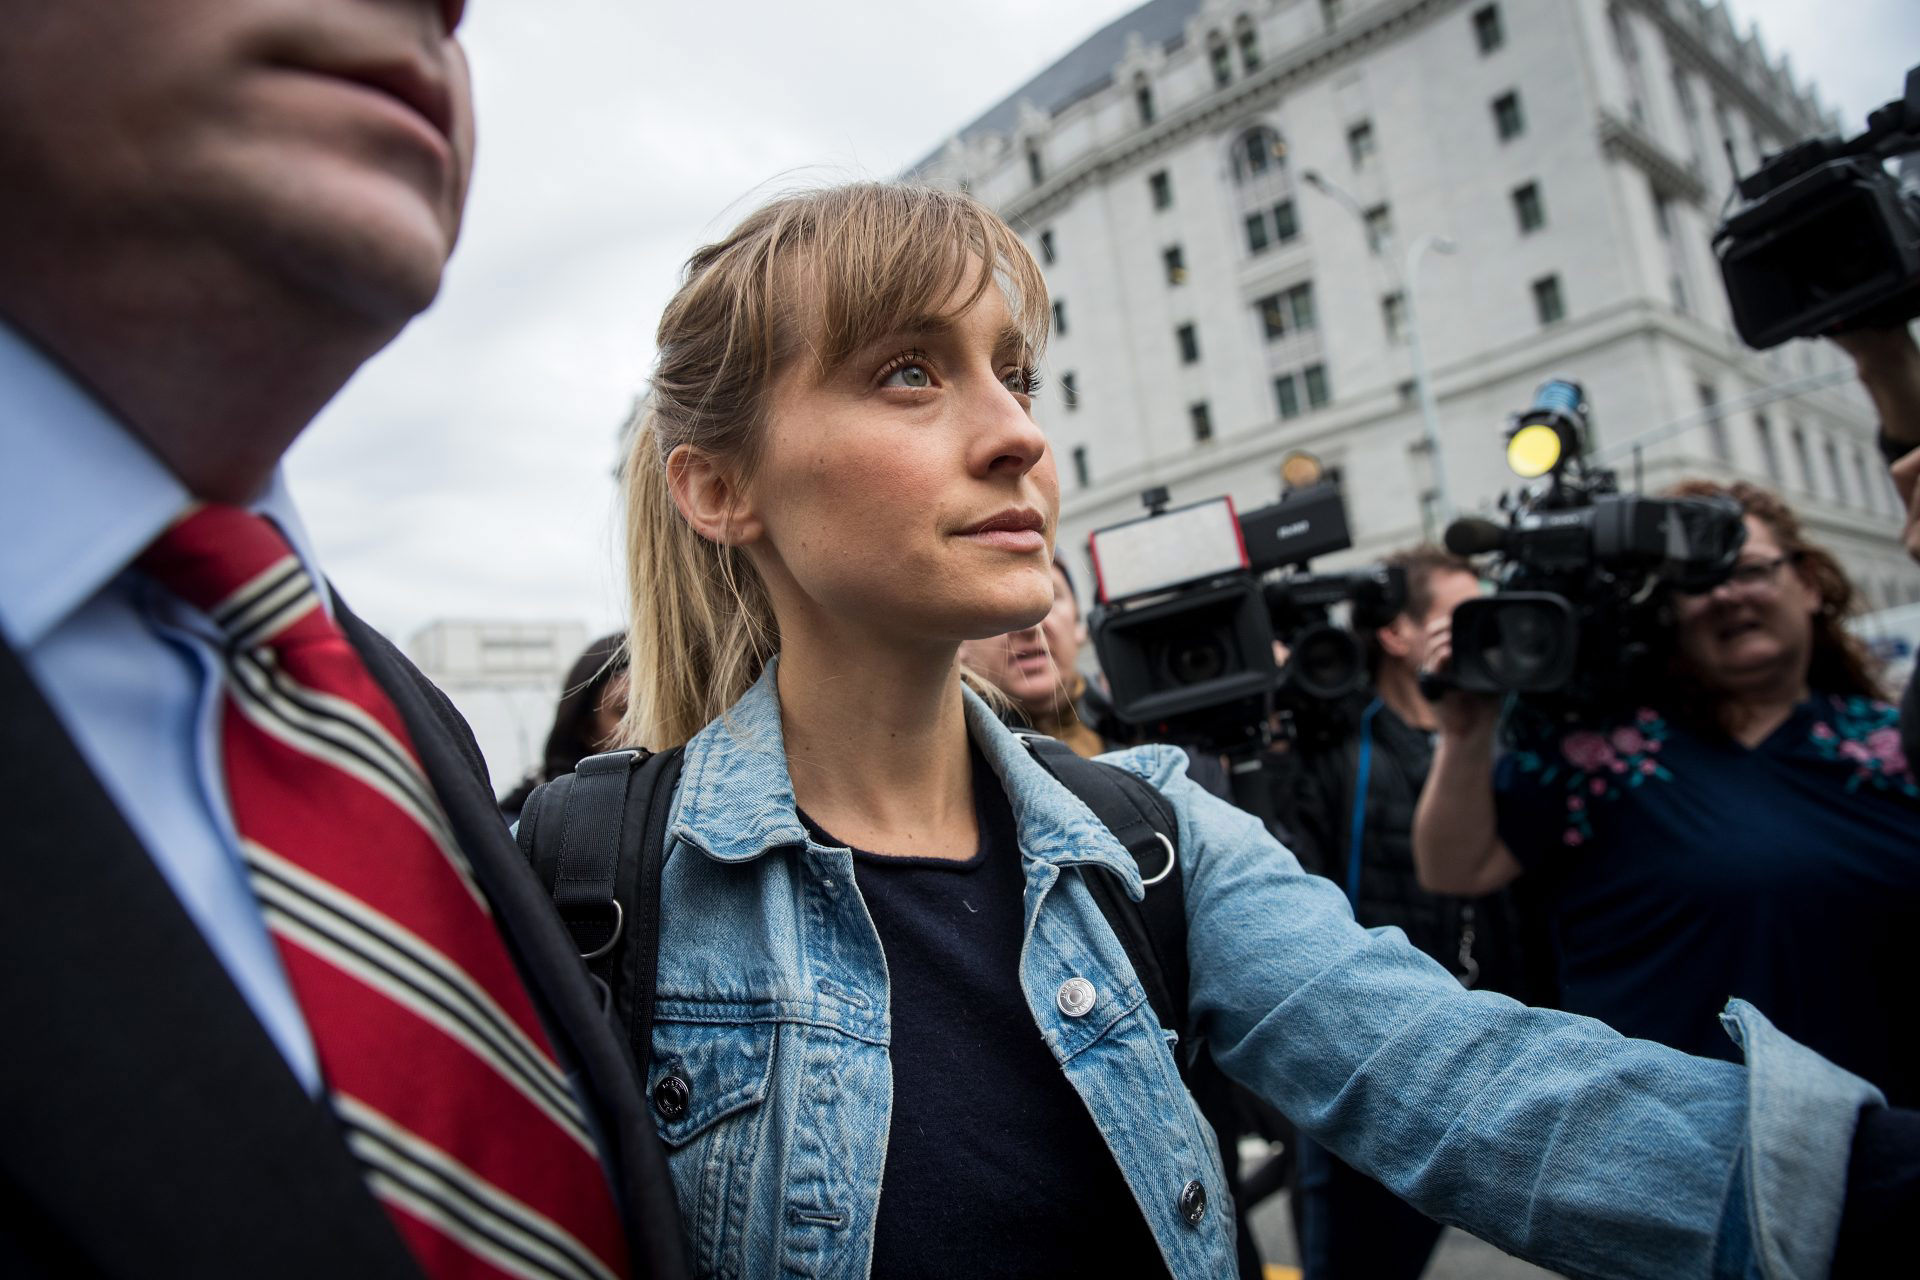 Smallville Star Allison Mack Released From Prison After Doing Time For Cult Involvement